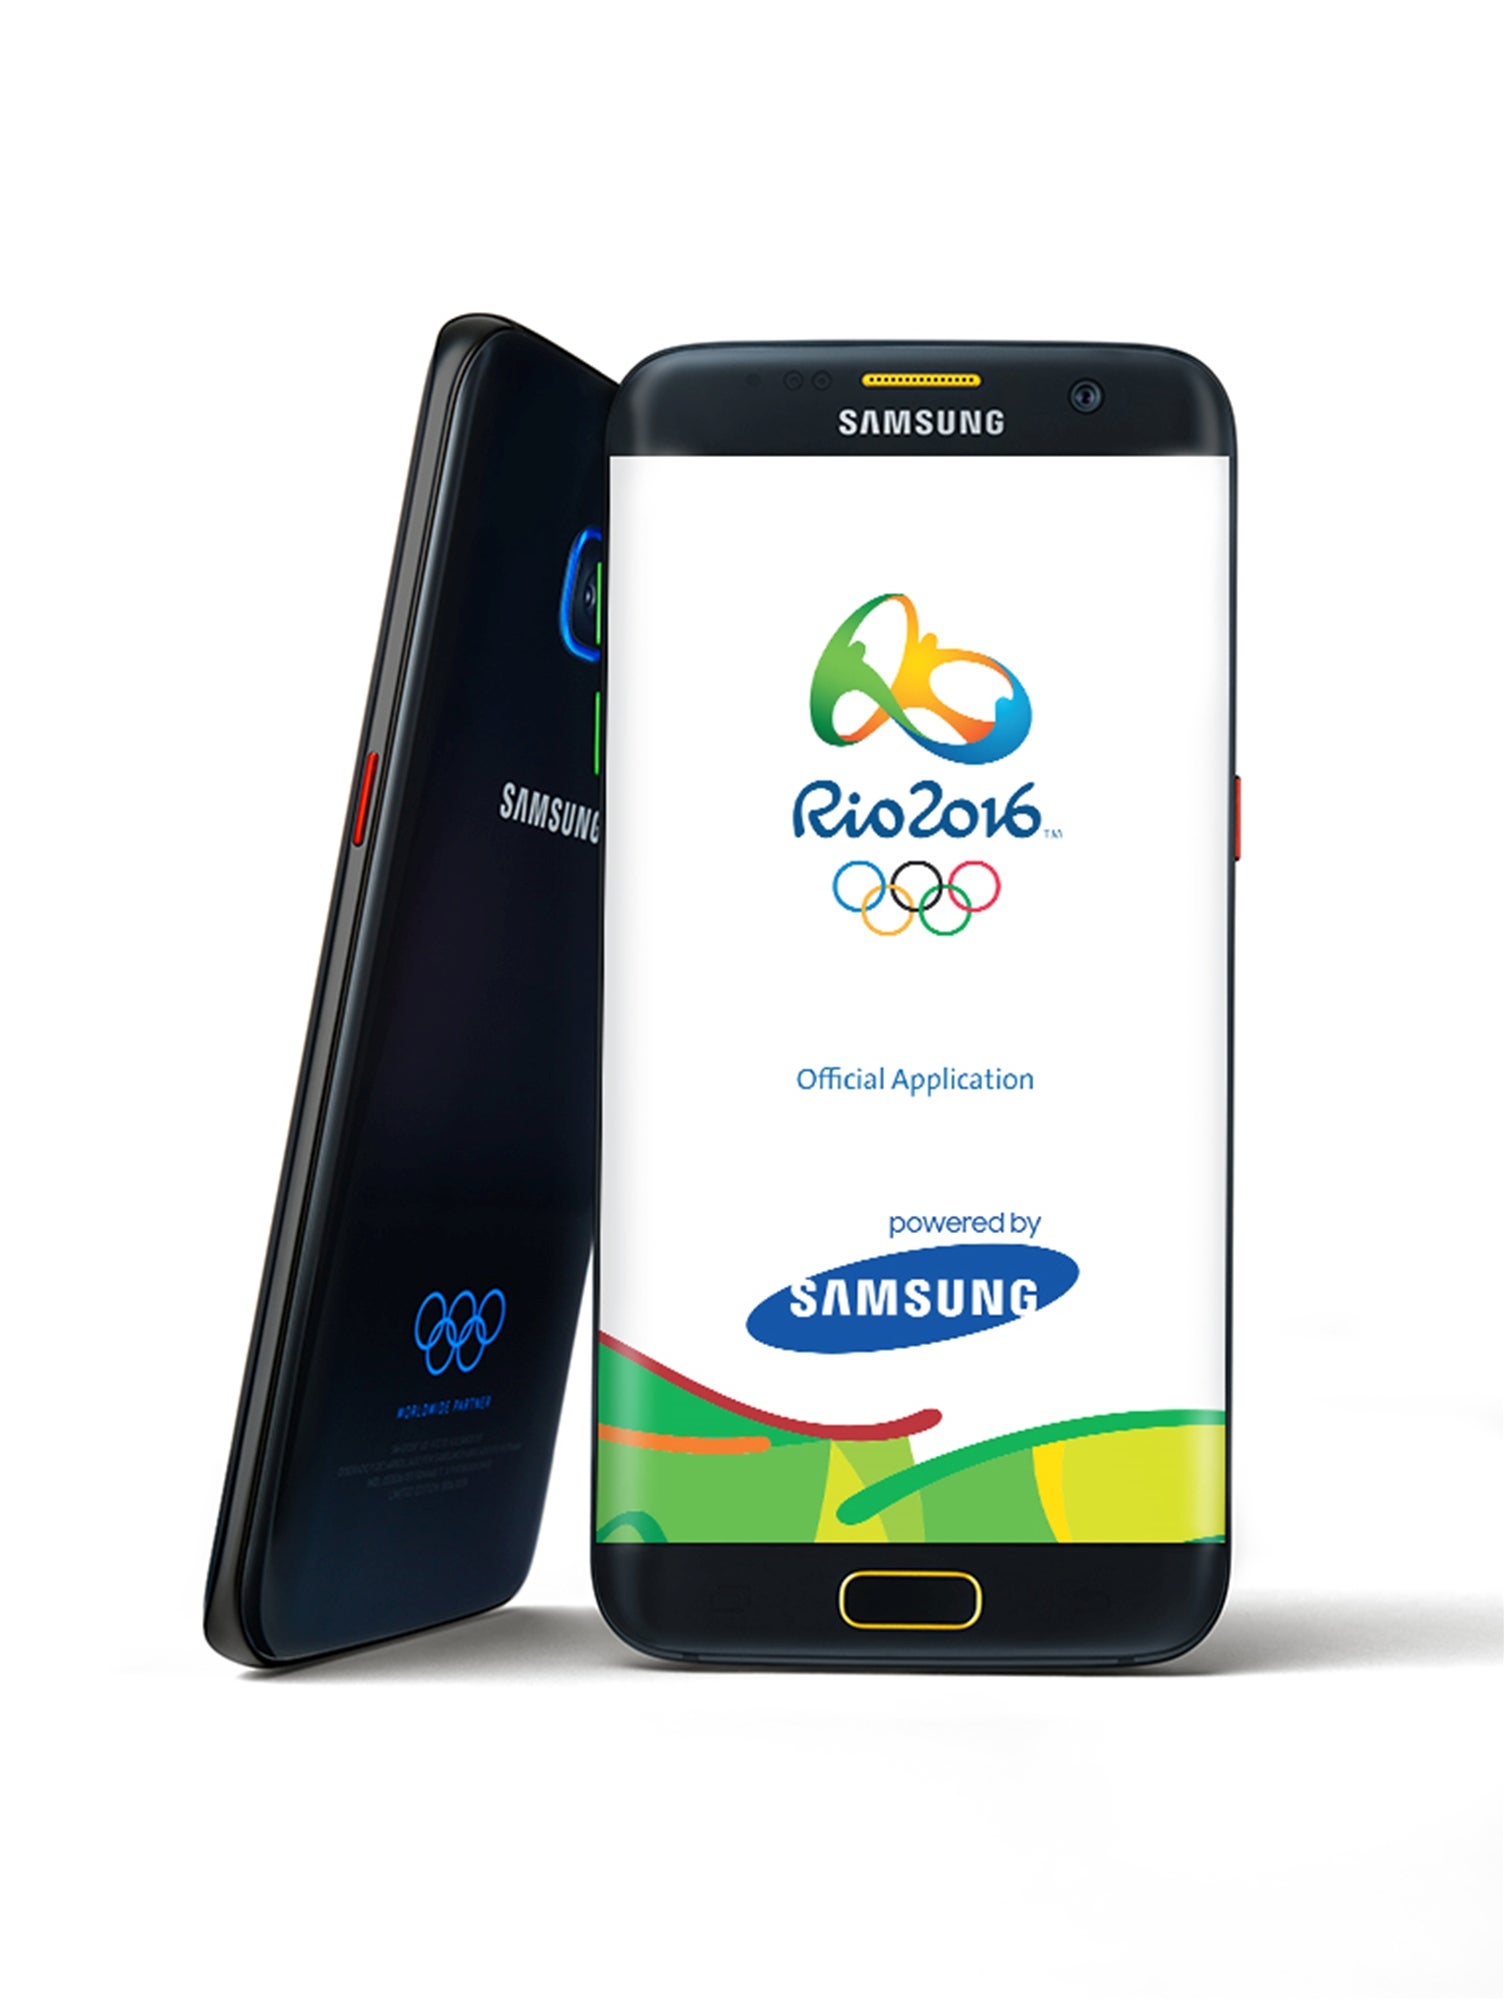 Samsung Galaxy S7 and S7 edge Olympic Editions unveiled, heading to Best Buy later this month